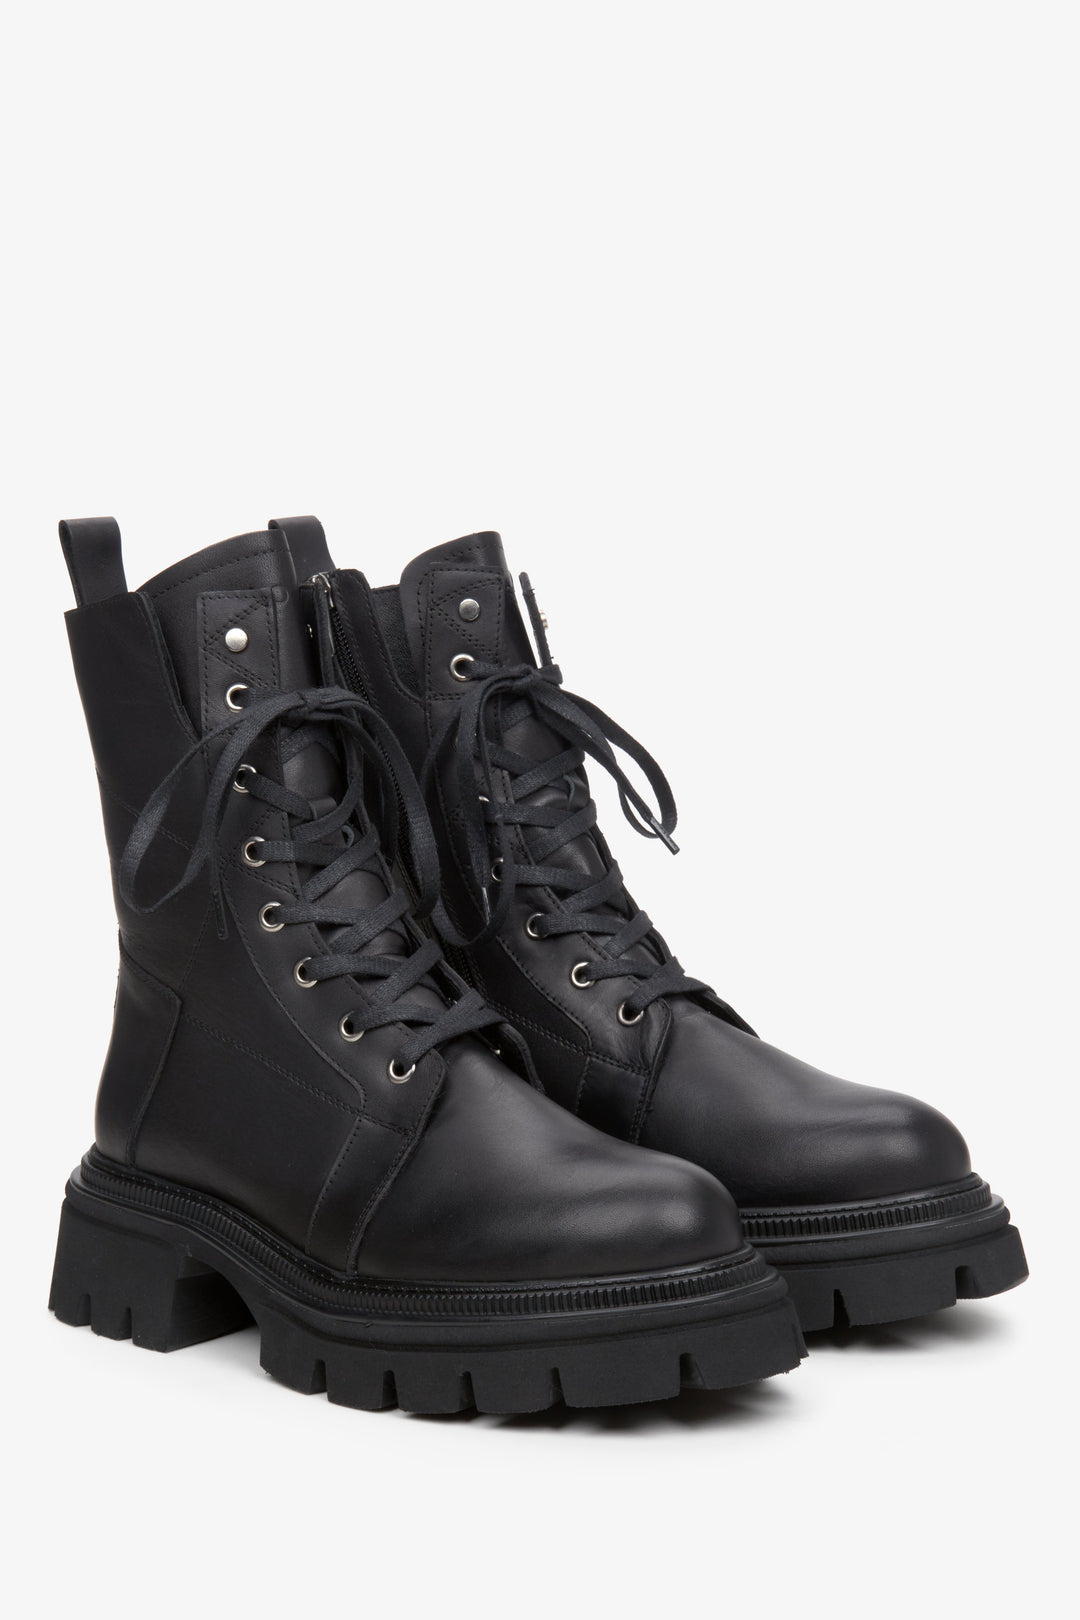 Women's black leather  boots with decorative lacing.